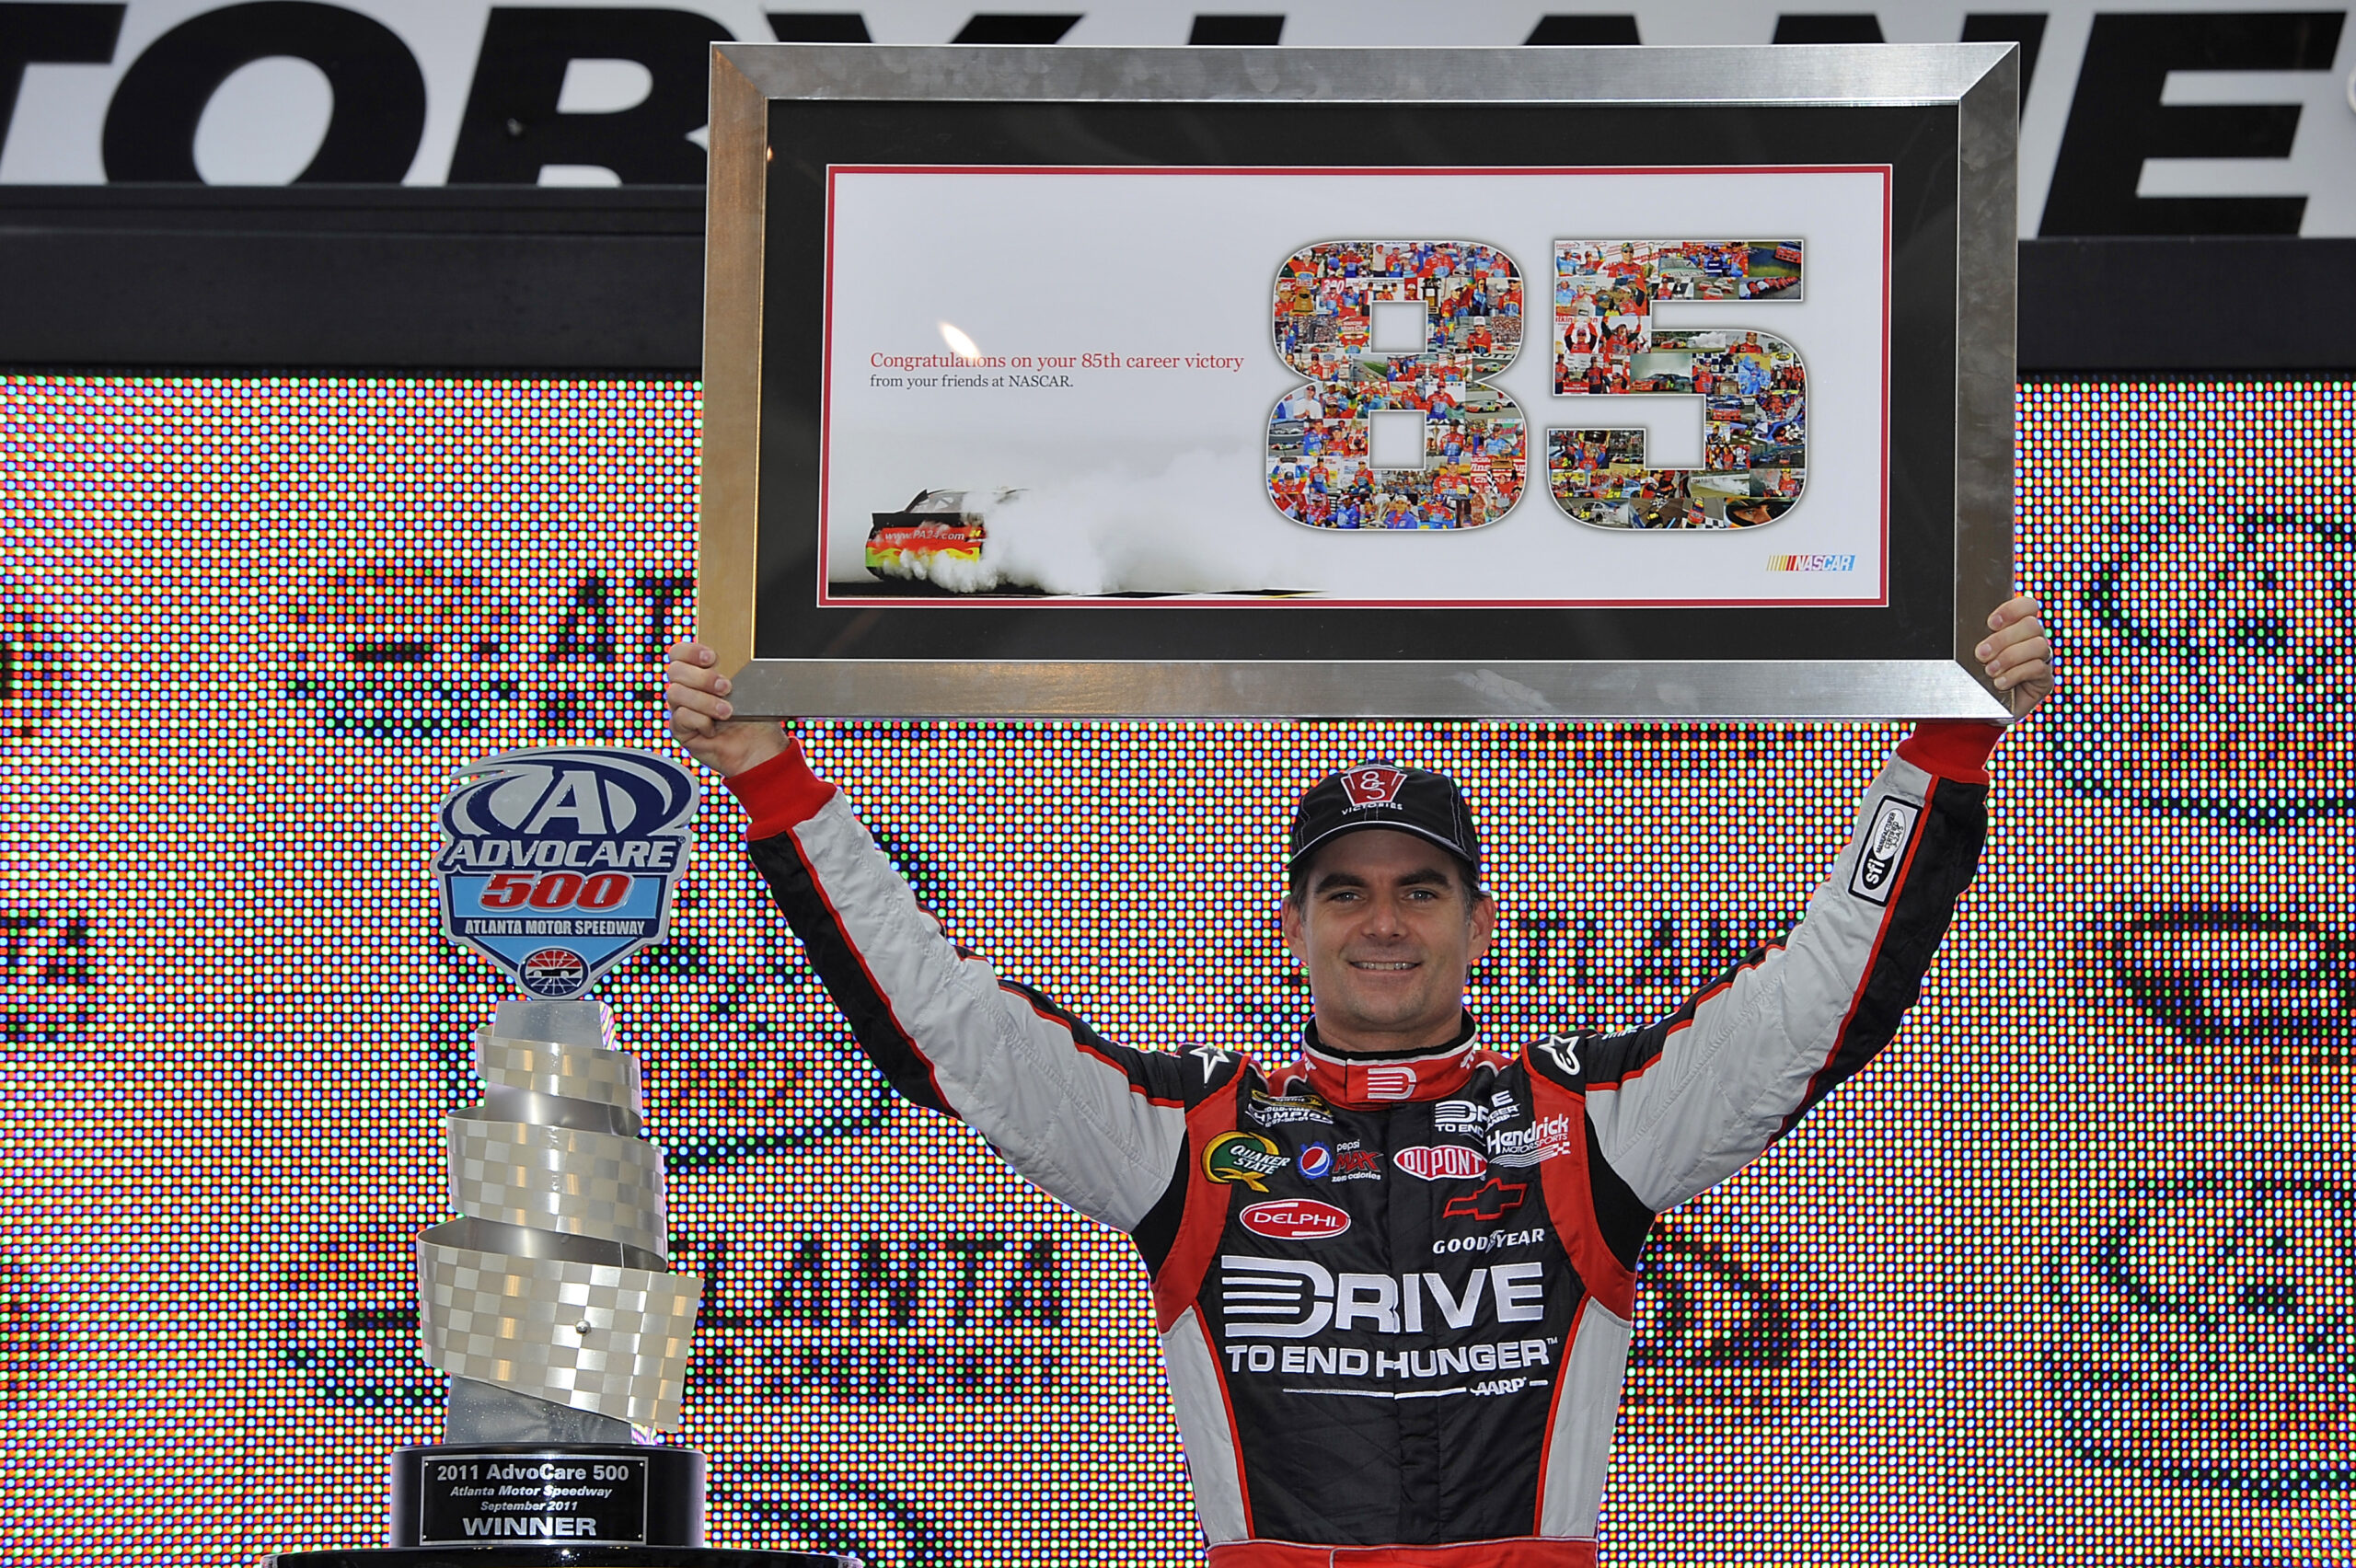 In general, Jeff Gordon established himself as a legend such as the time of his 85th Cup win in 2011. (Photo: Hendrick Motorsports)